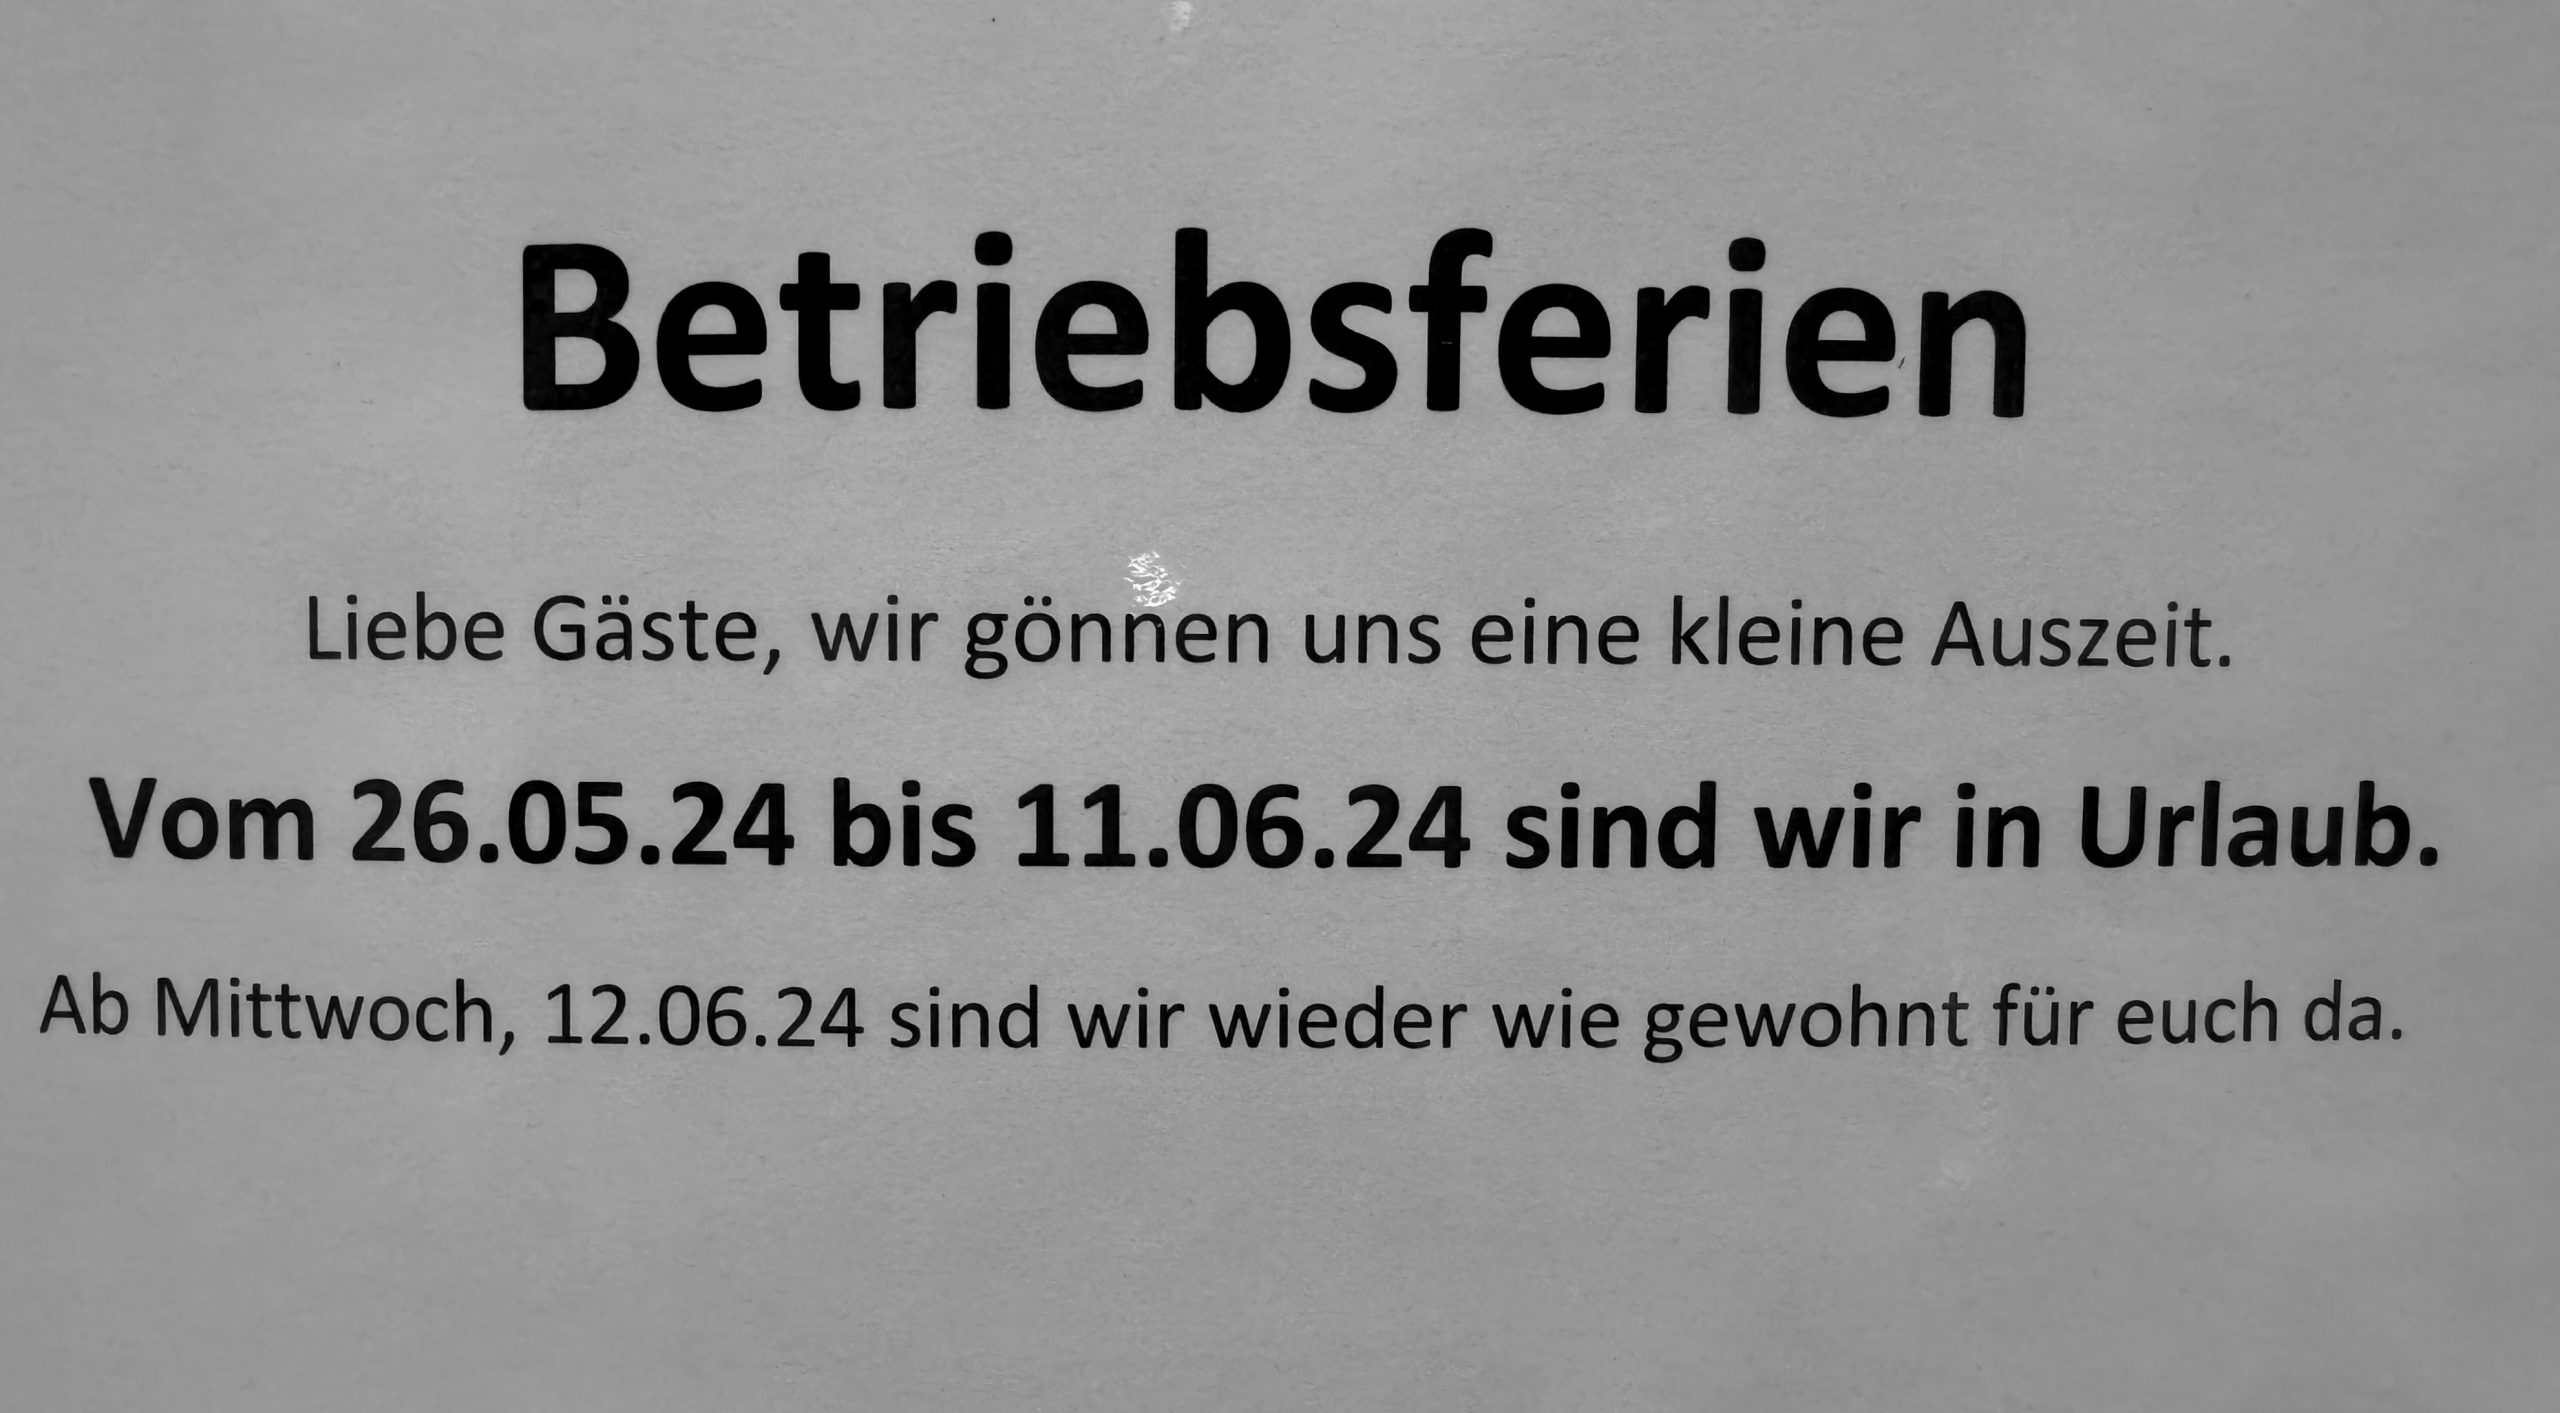 You are currently viewing Betriebsferien vom 26.05. bis 11.06.24